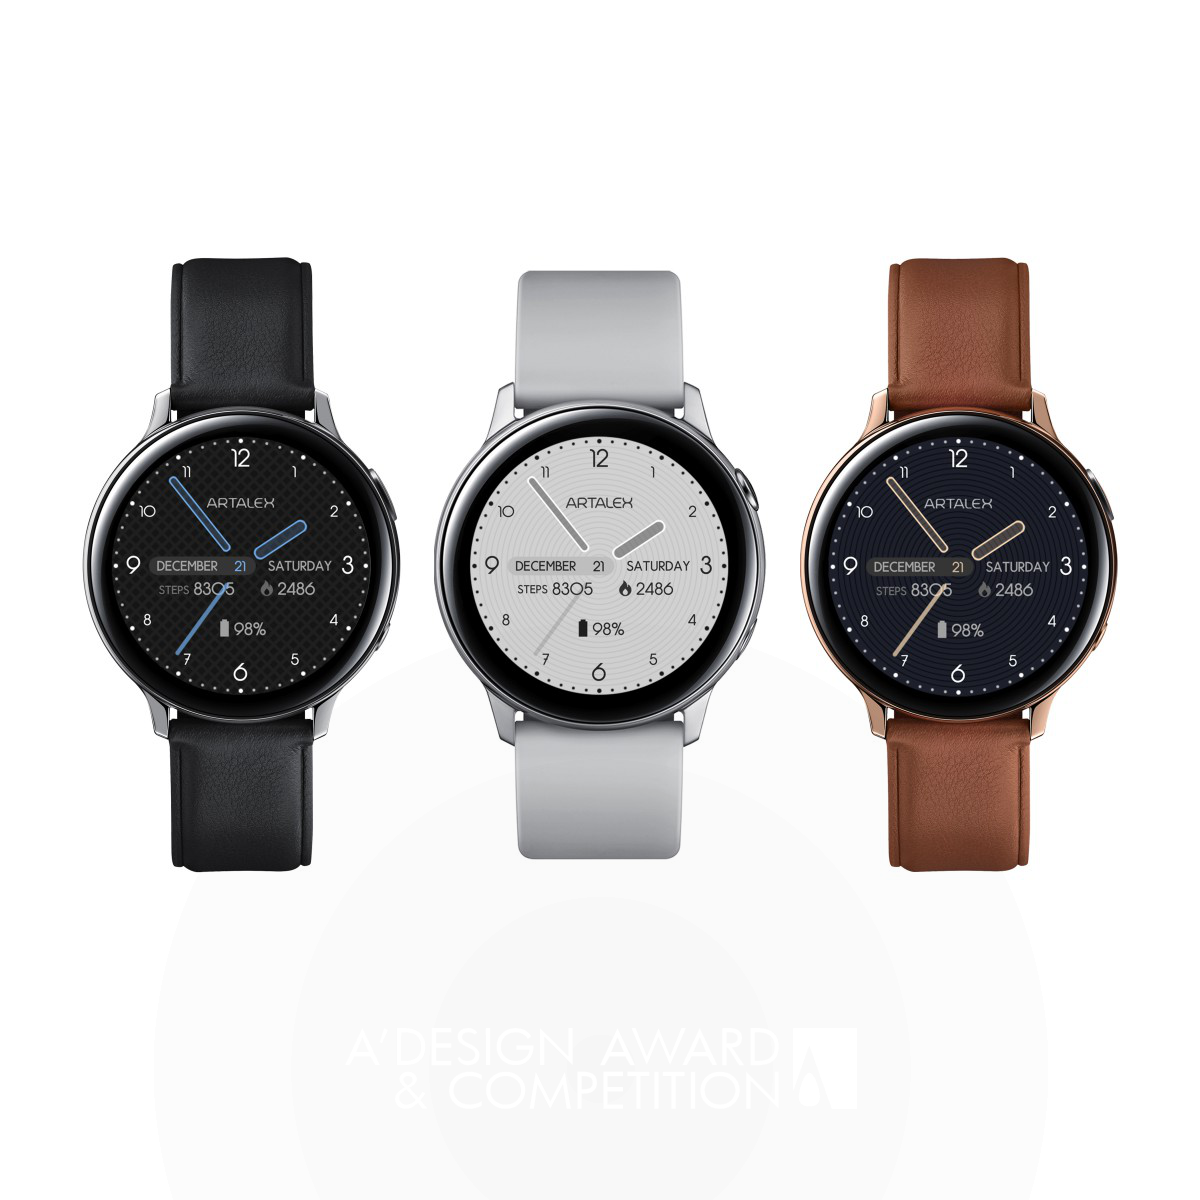 Pan Yong's Simple Code II Saphire: Redefining Smartwatch Faces